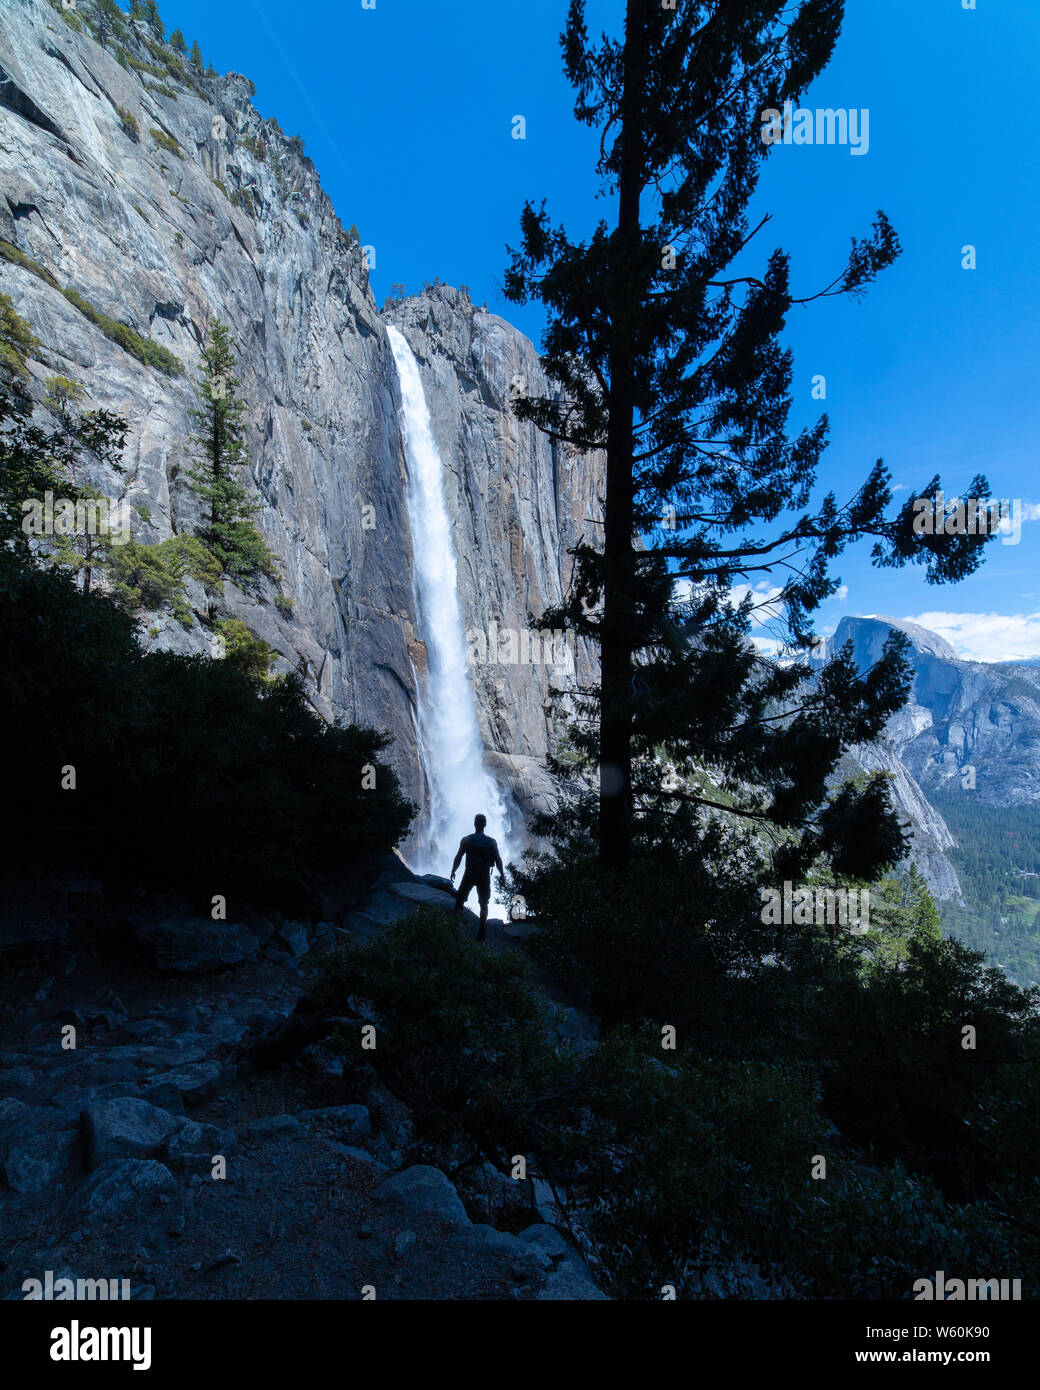 Man standing silhouetted in front of massive waterfall. Stock Photo